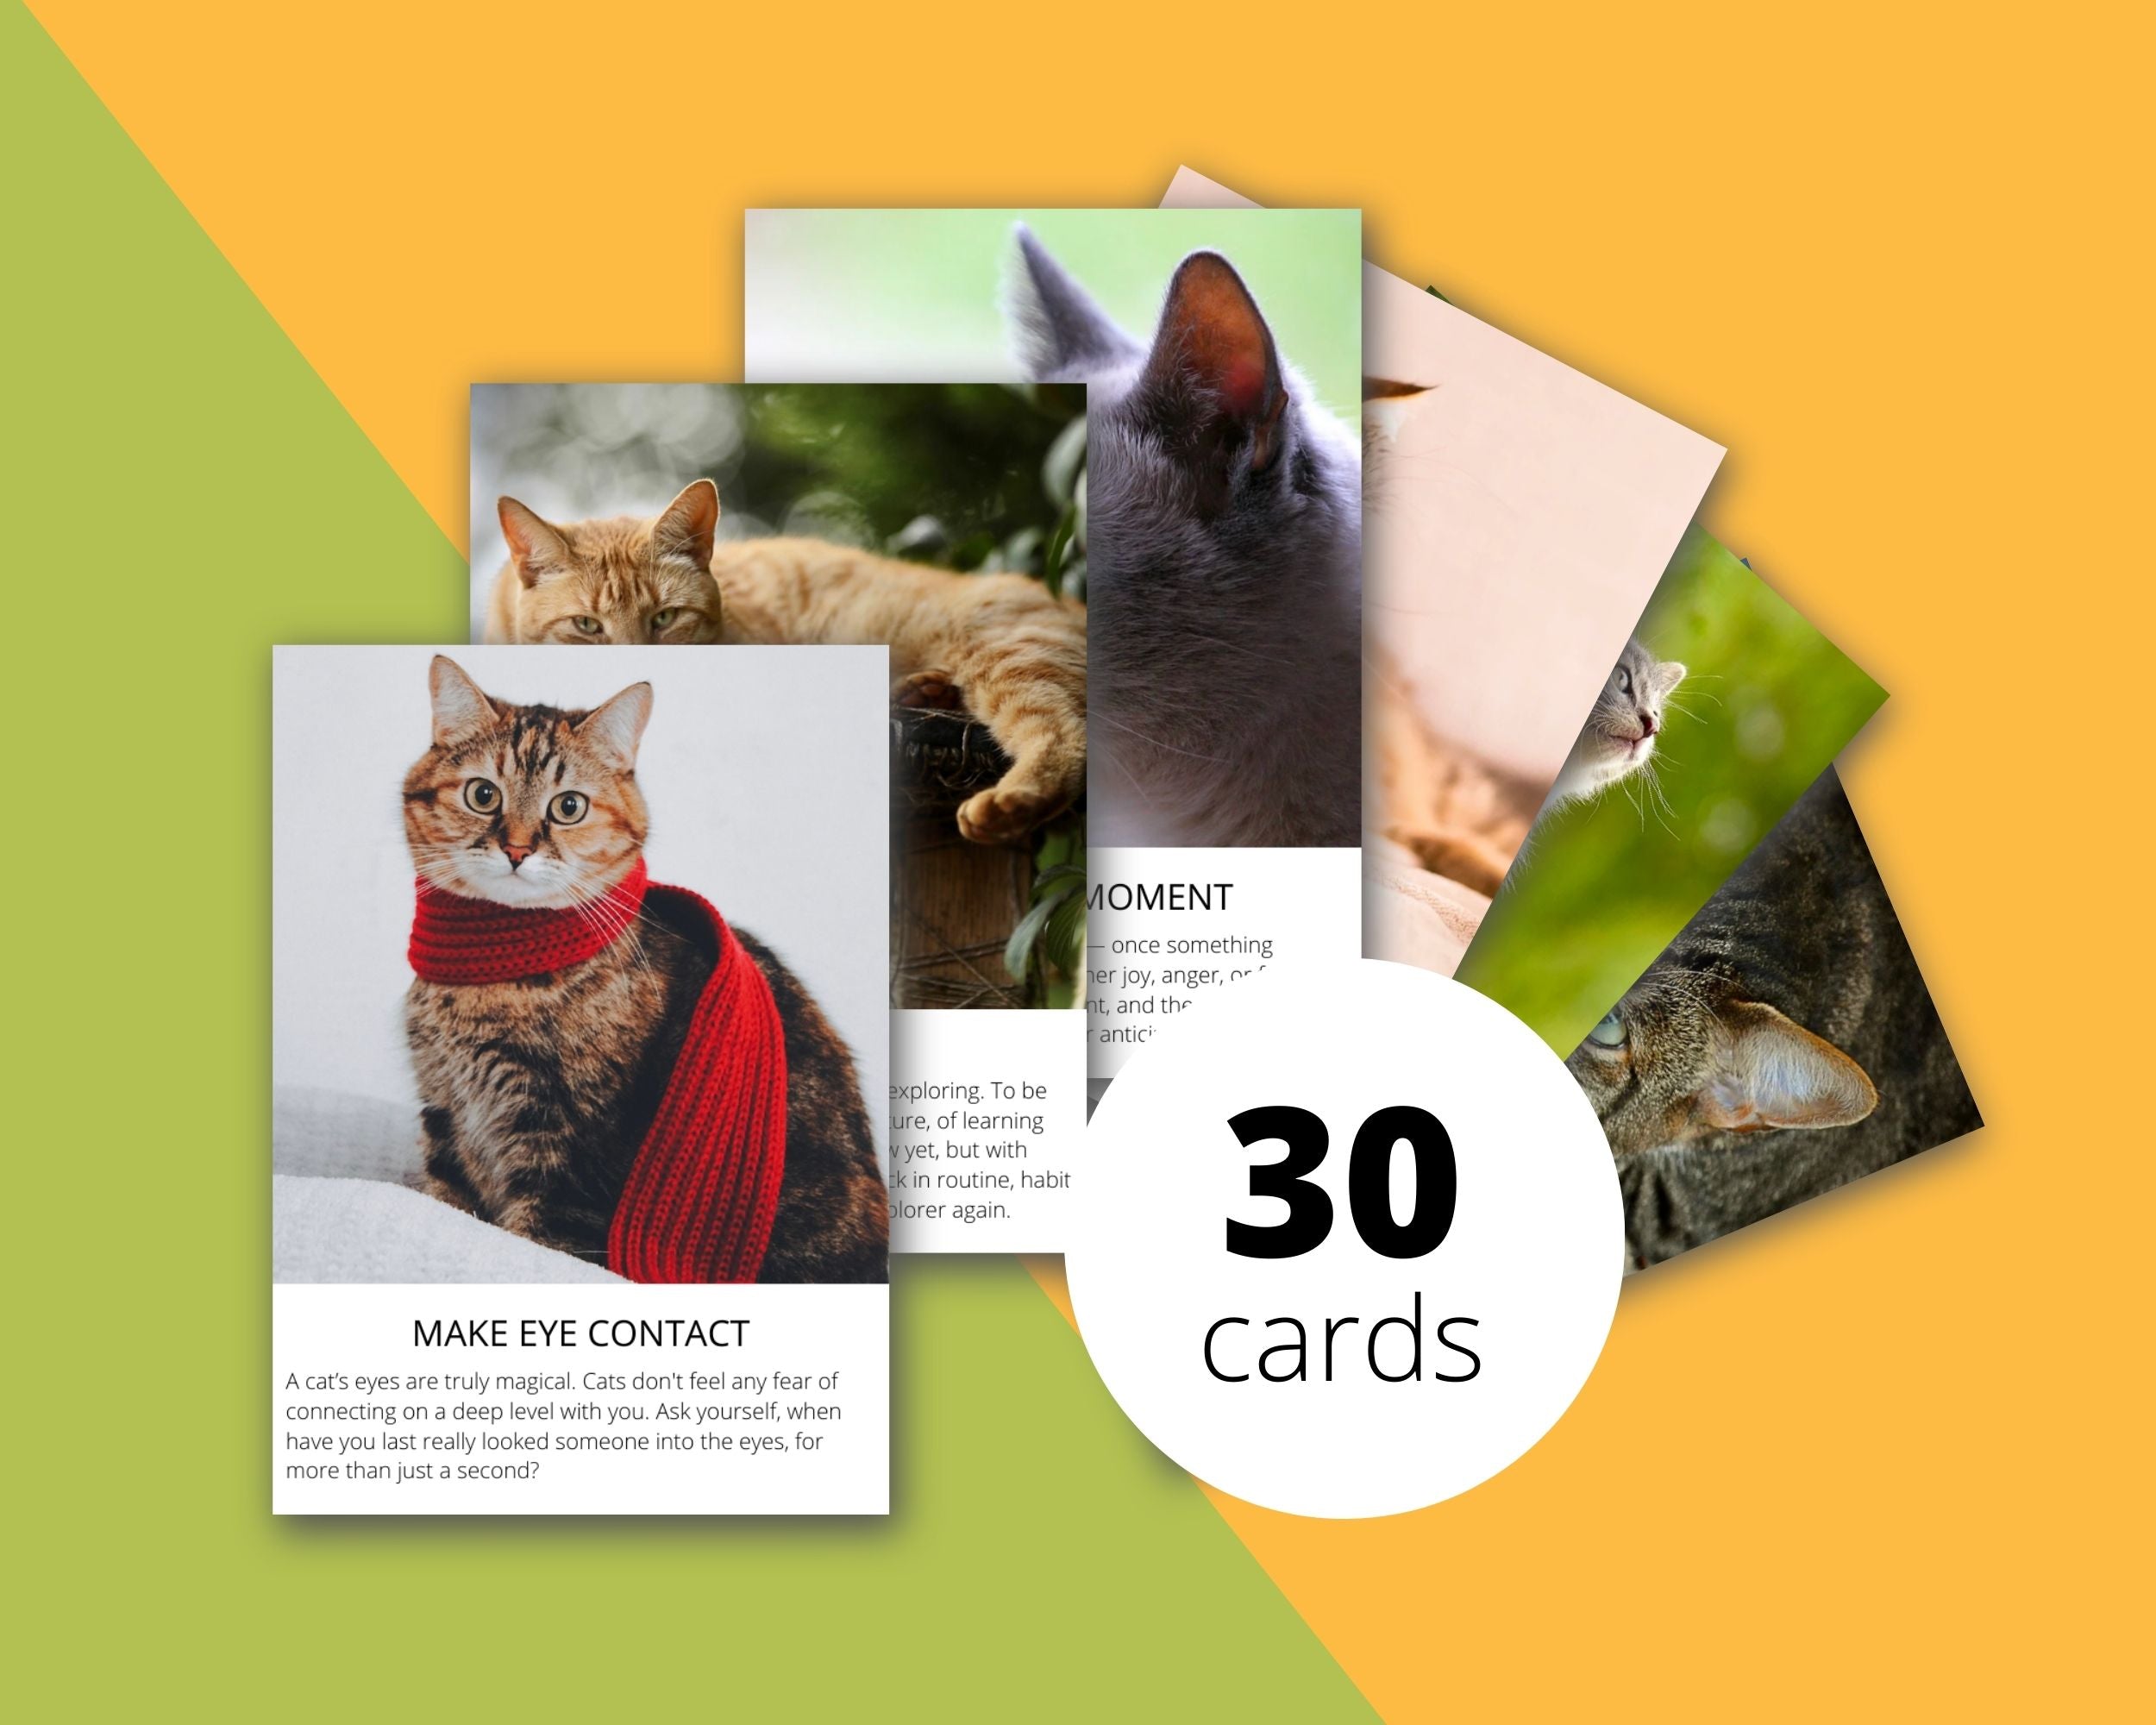 Spiritual Lessons from Cats Card Deck | Editable 30 Card Deck in Canva | Size 2"x 2.7" | Commercial Use